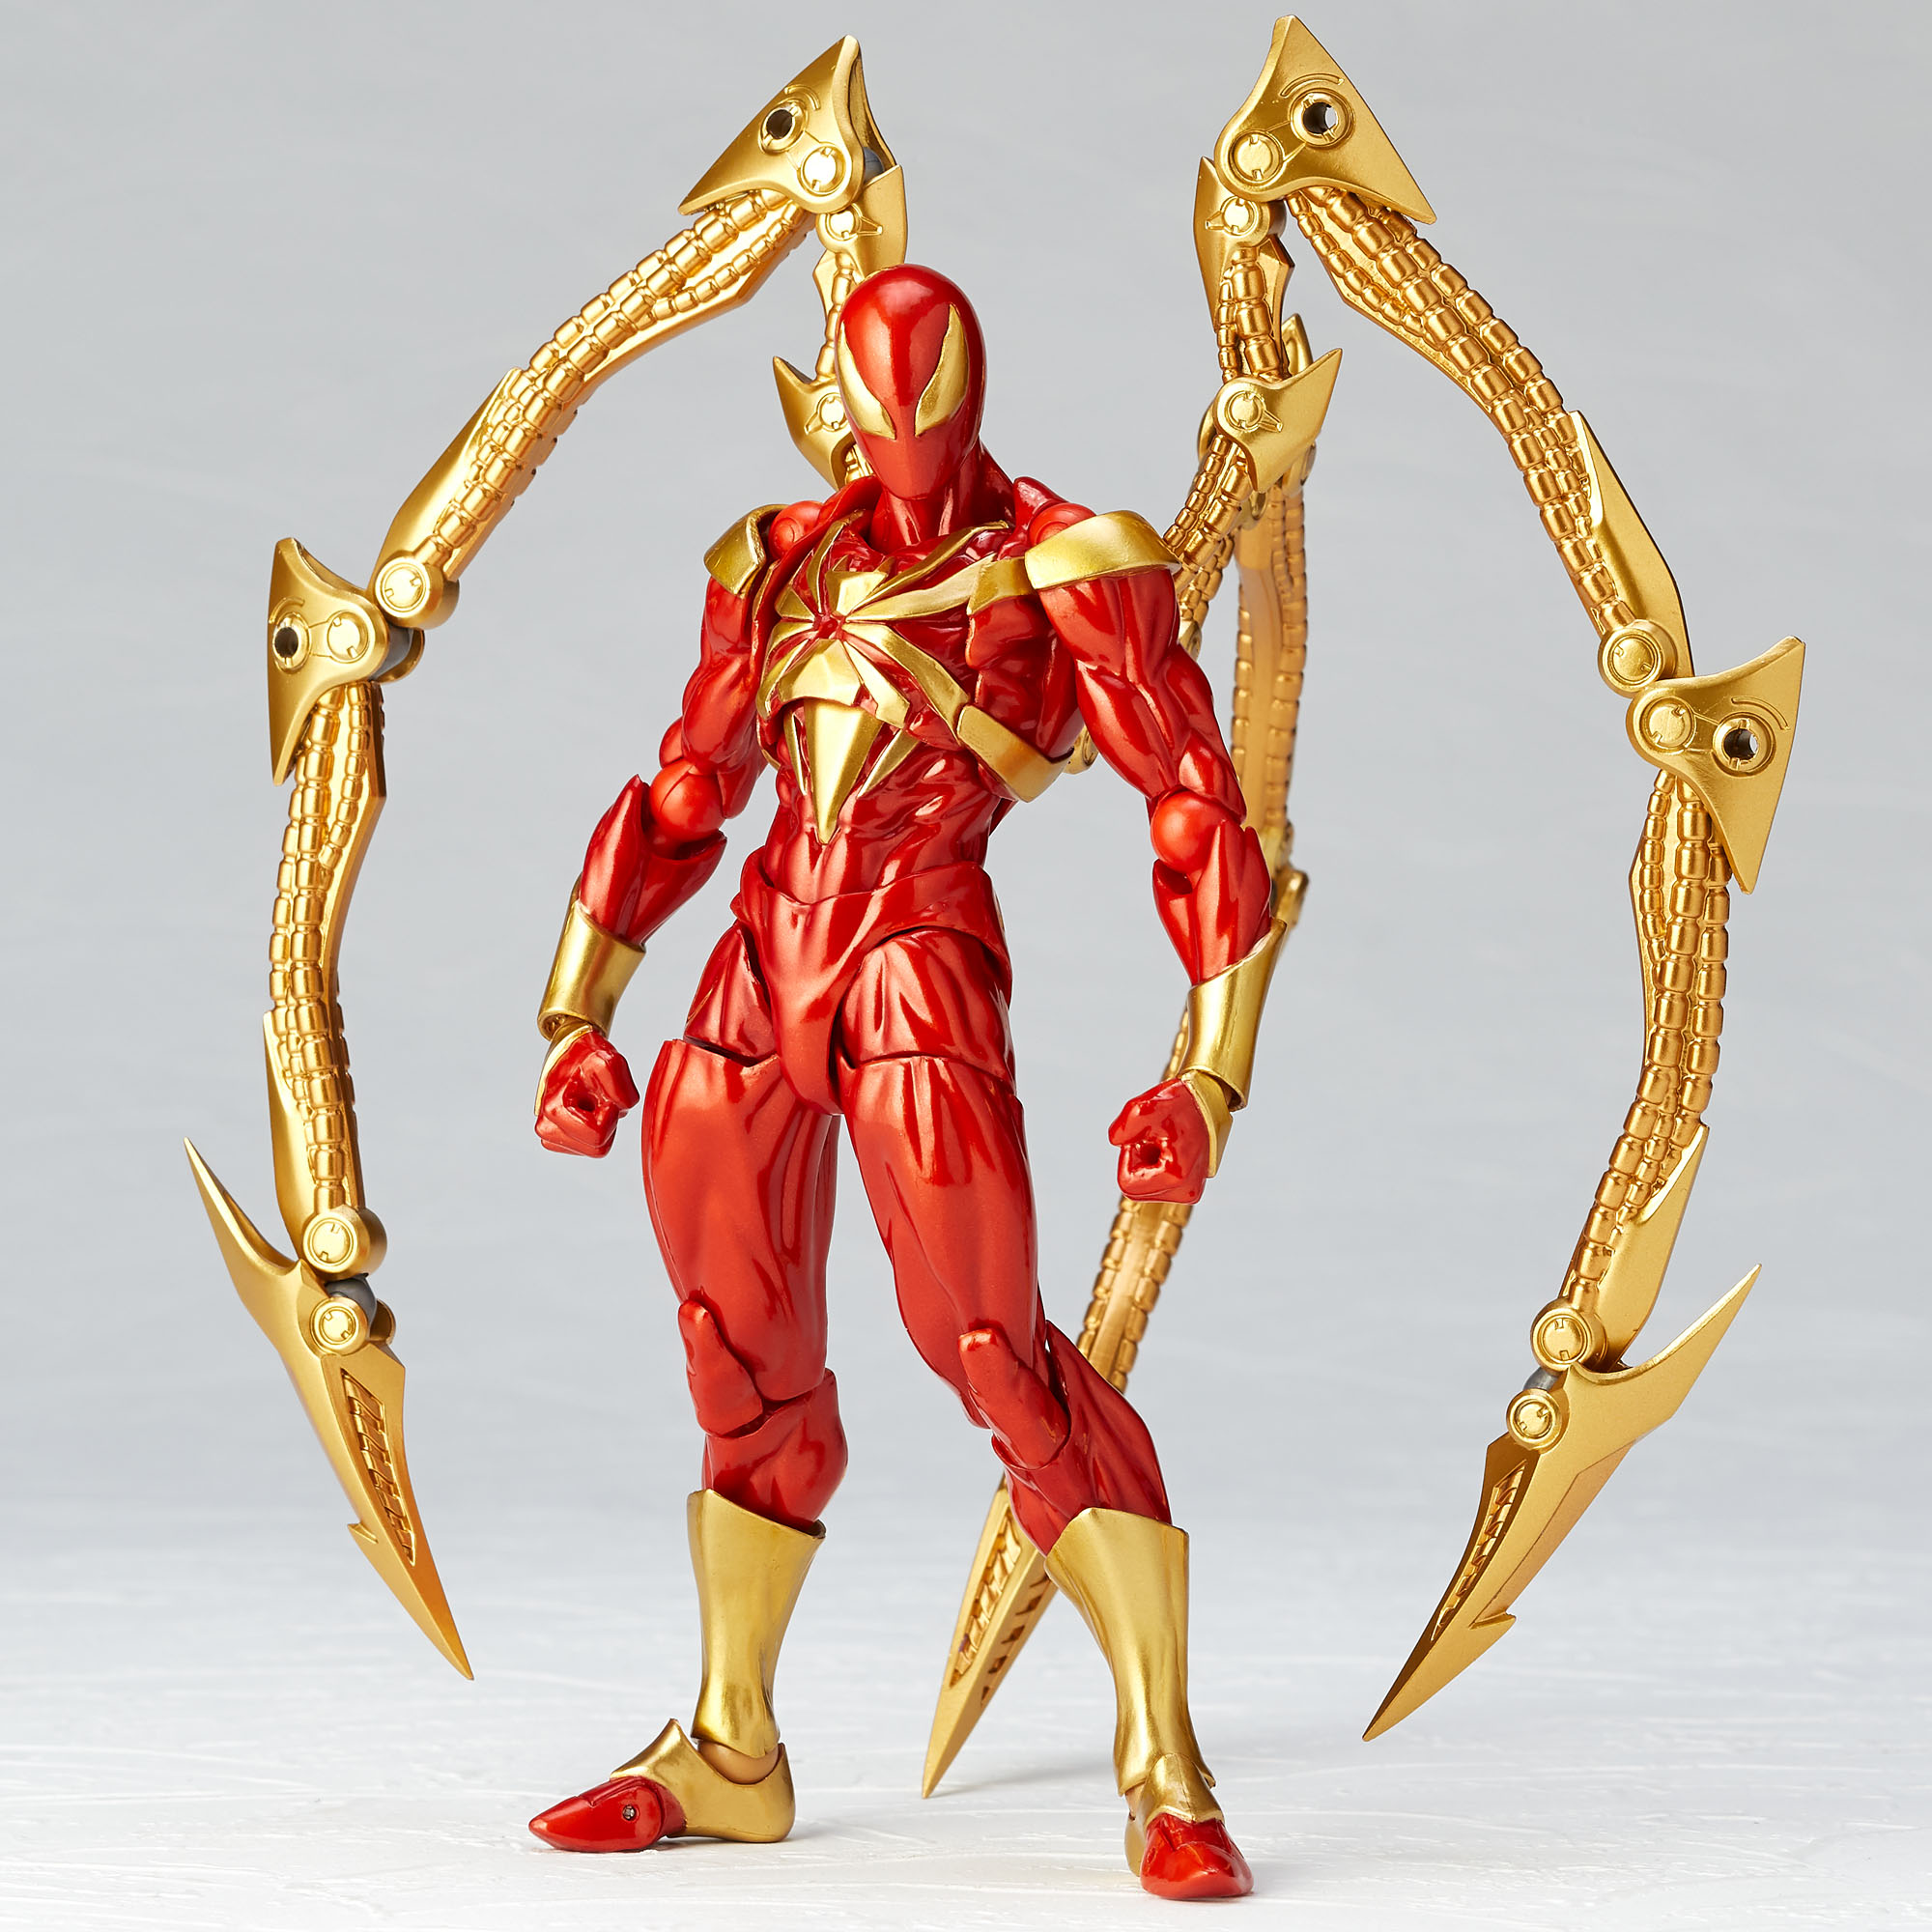 Four Marvel Avengers Infinity War Iron Spider illustration SpiderMan  Homecoming film series Iron Spider YouTube iron spiderman heroes  fictional Characters png  PNGEgg